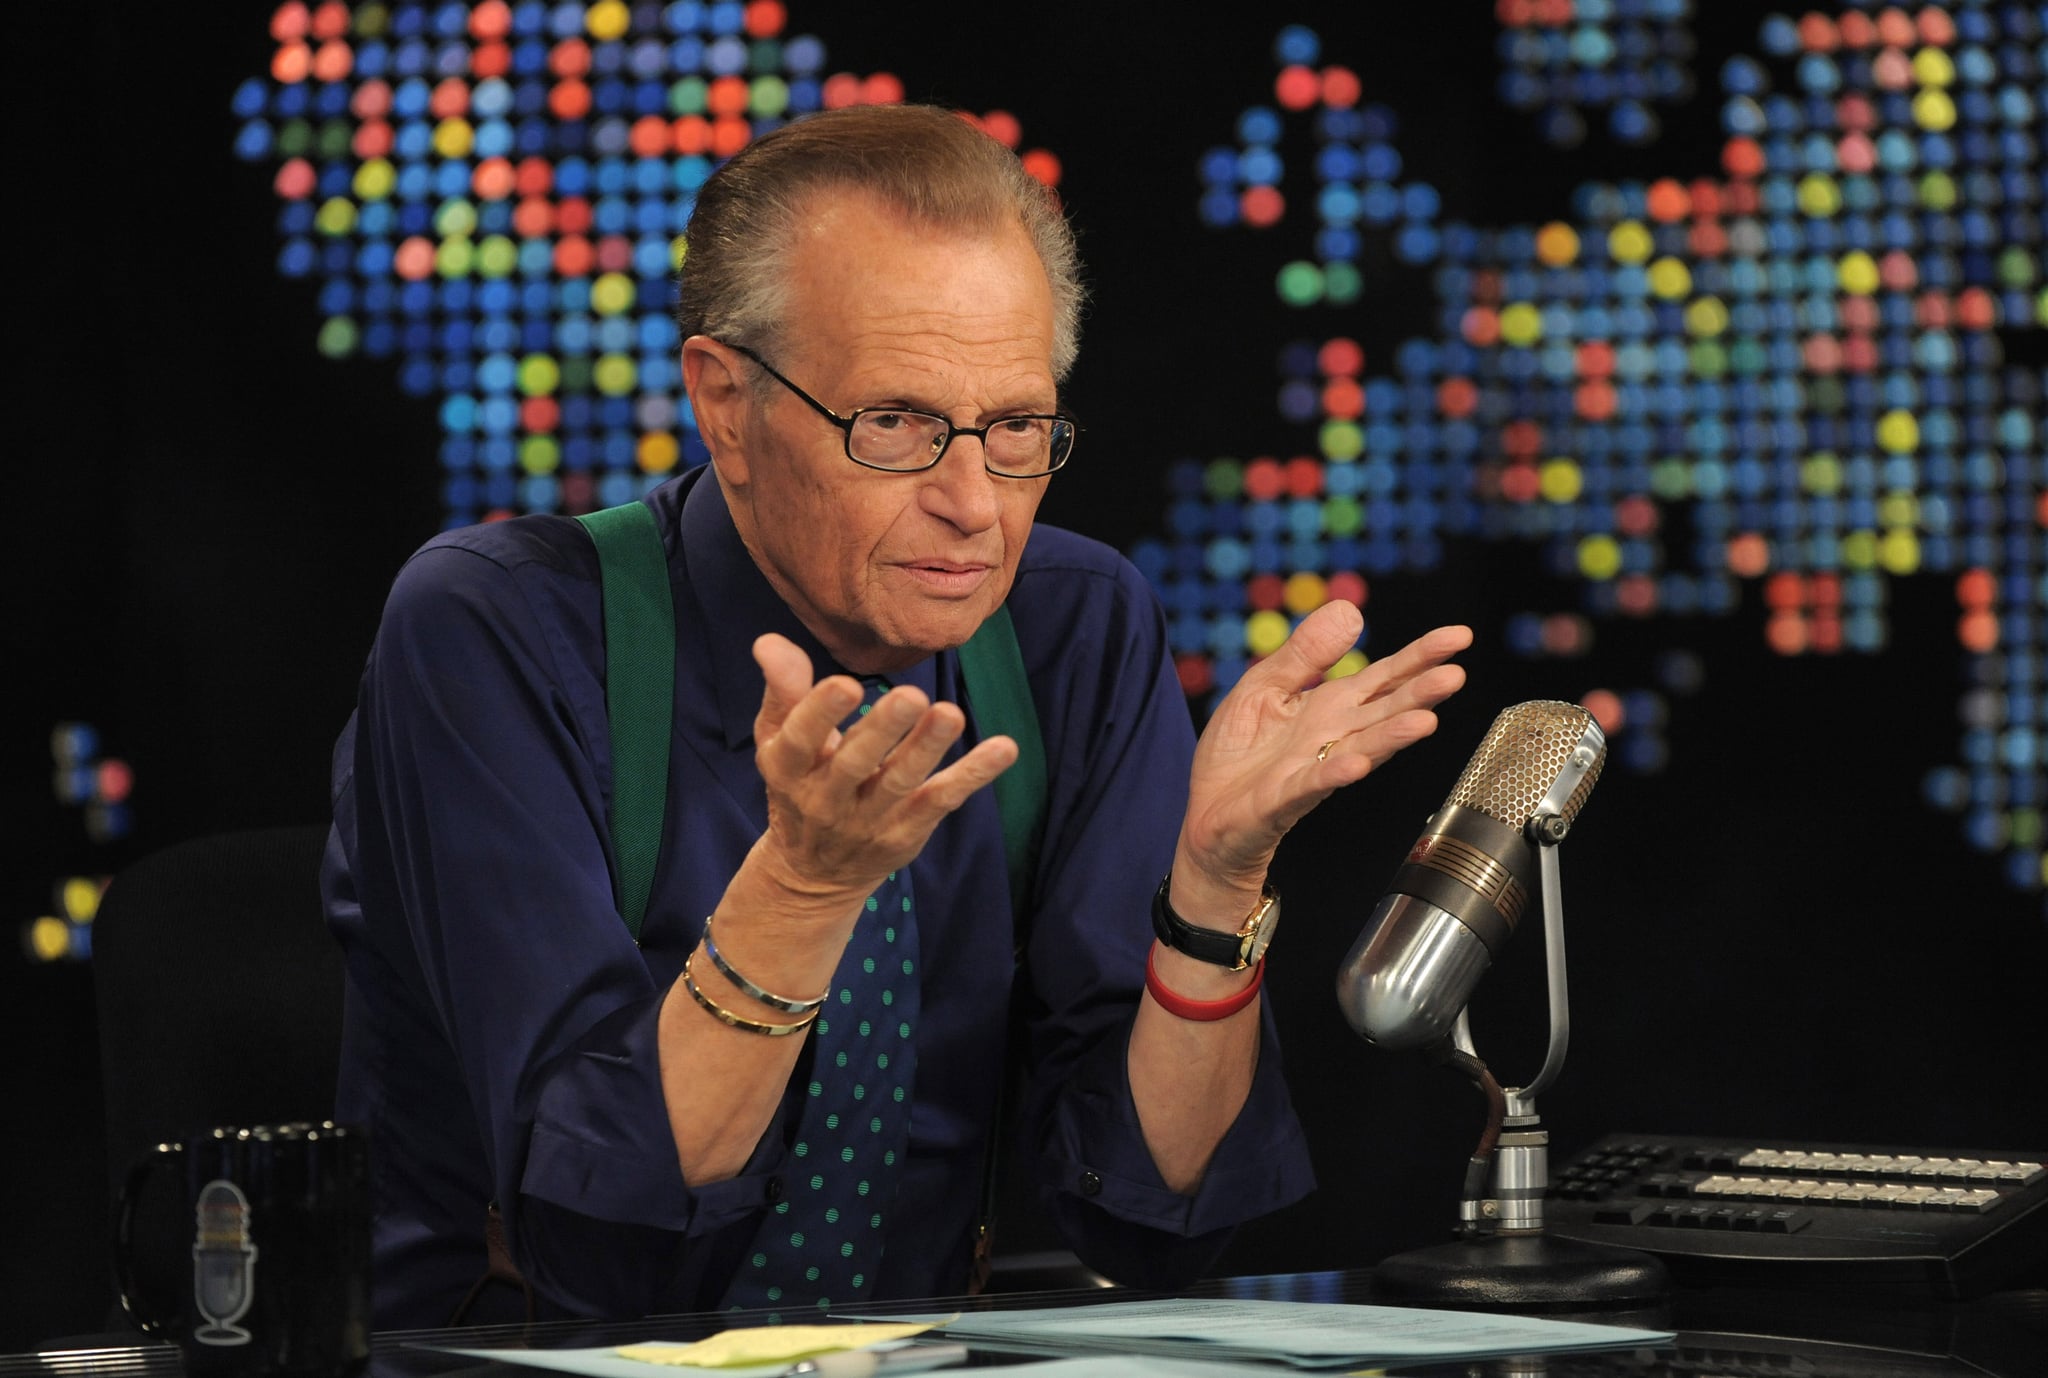 Larry King speaks during Larry King Live: Disaster in the Gulf Telethon held at CNN LA on June 21, 2010 in Los Angeles, California. 20096_003_0097.JPG